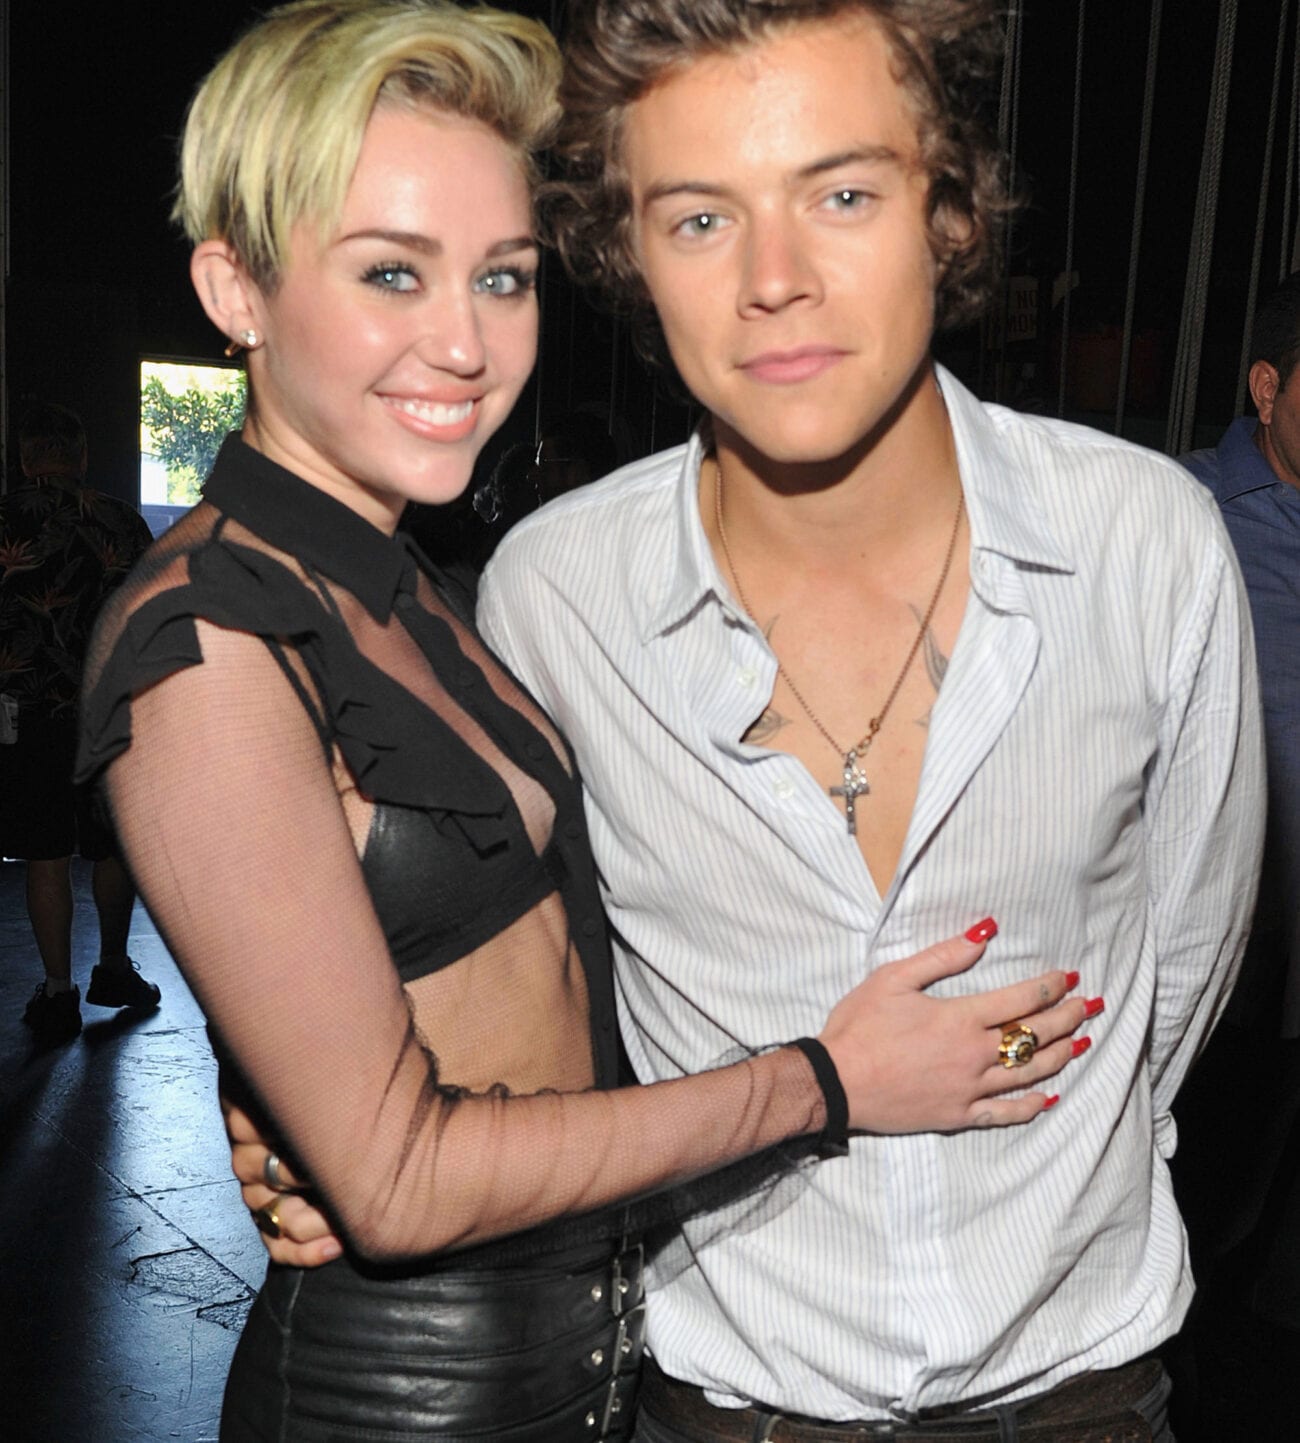 Are we about to witness the biggest celebrity couple? Find out why everyone thinks Miley Cyrus is falling for Harry Styles.